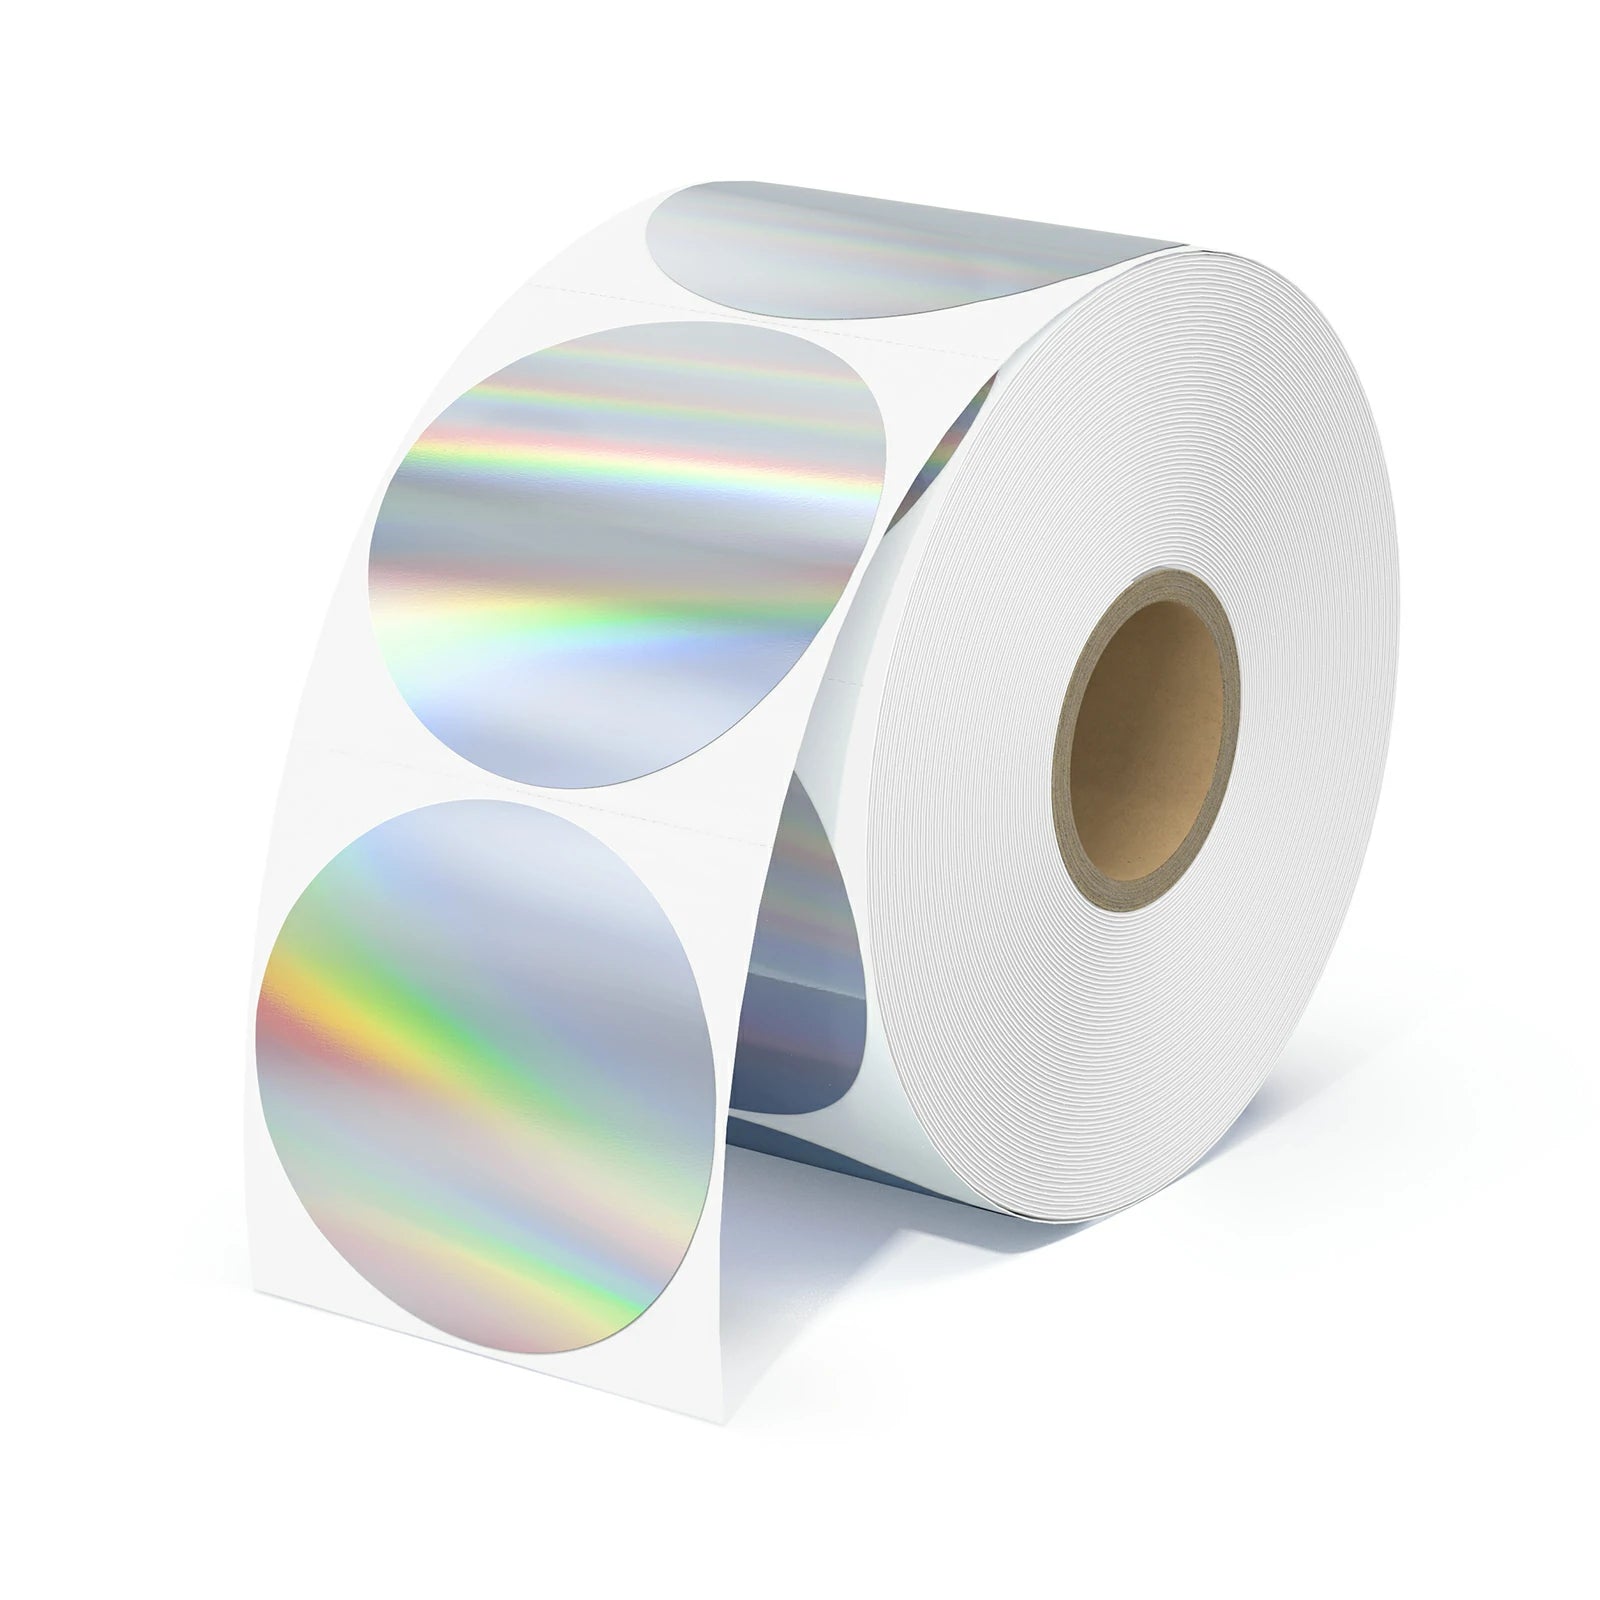 MUNBYN iridescent silver round thermal labels